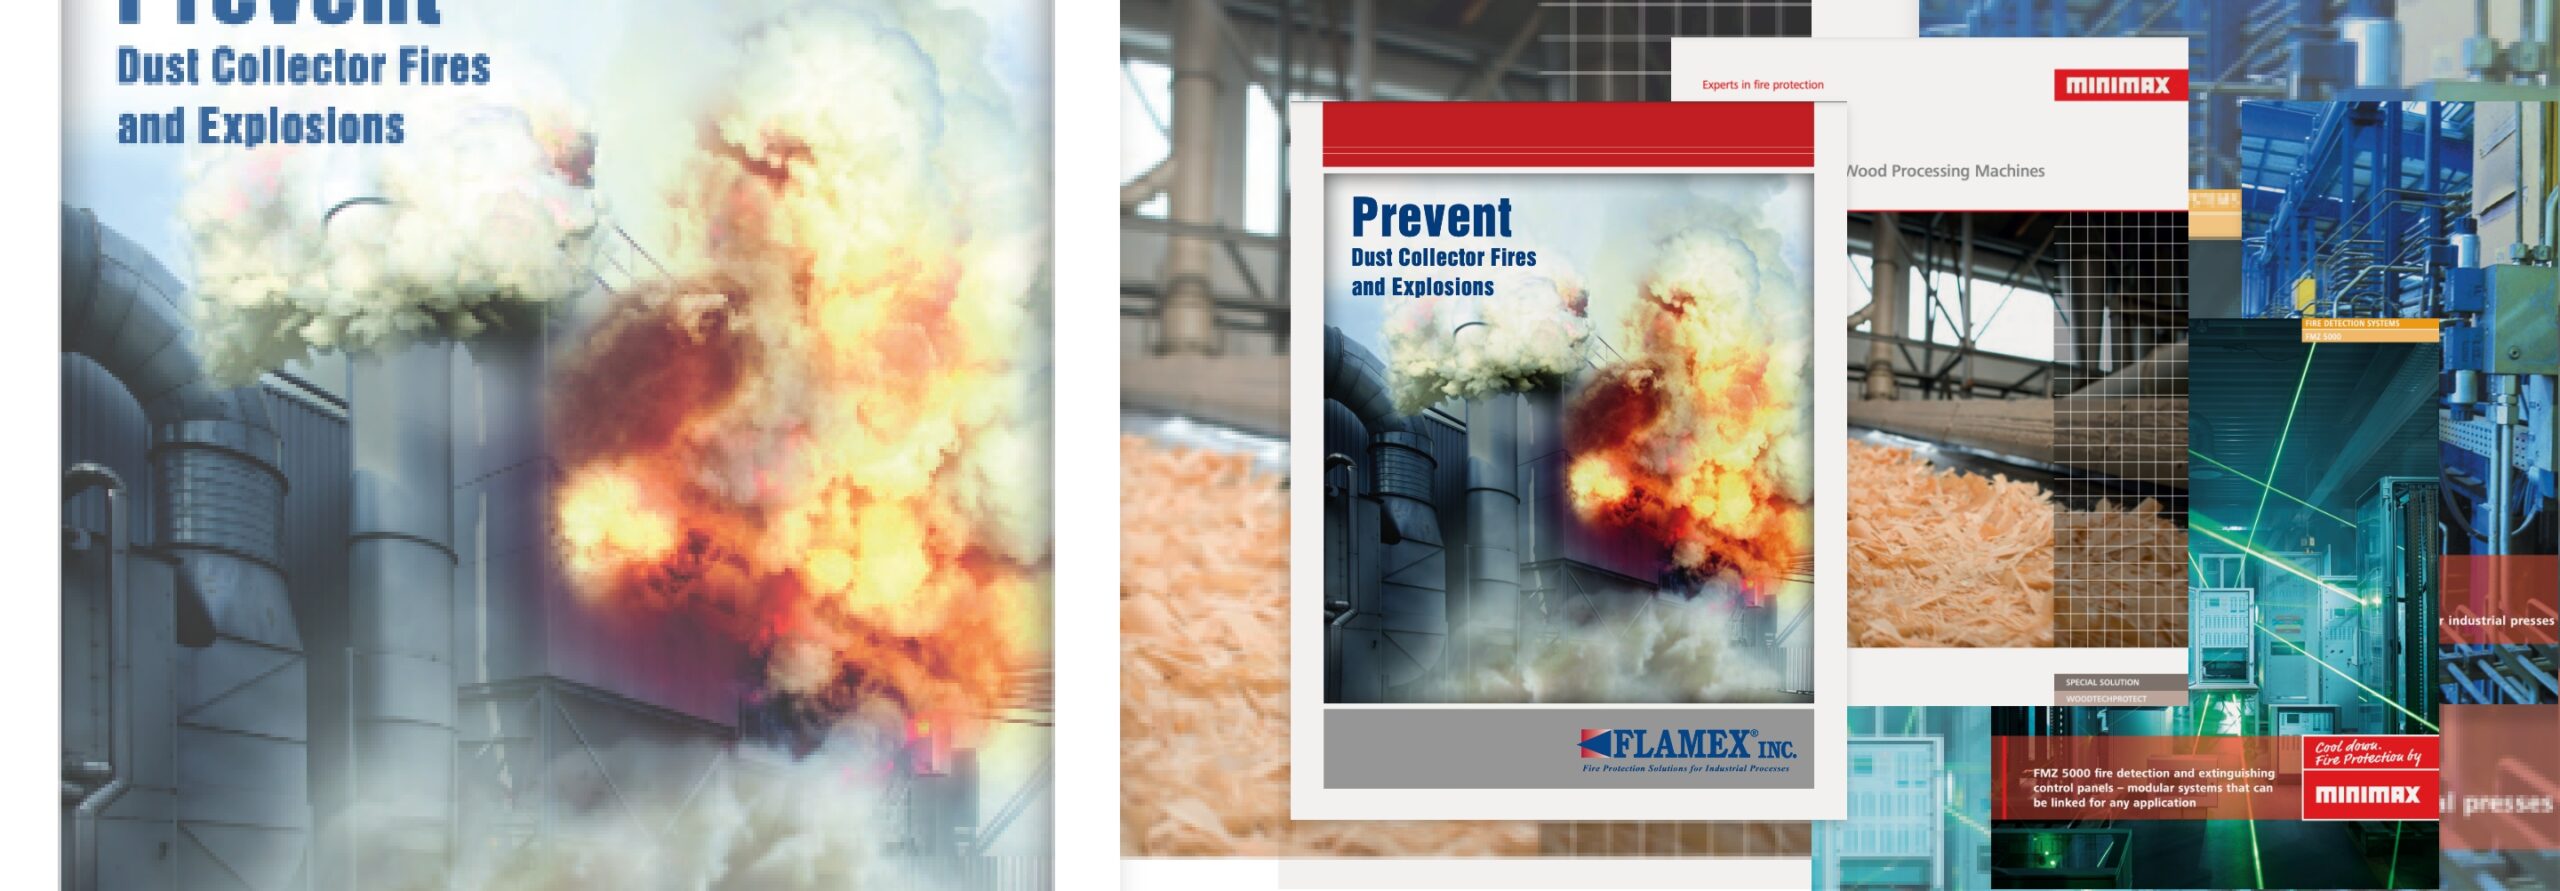 Downloads. FLAMEX Inc. is a leading supplier of customized industrial process fire prevention and protection equipment.